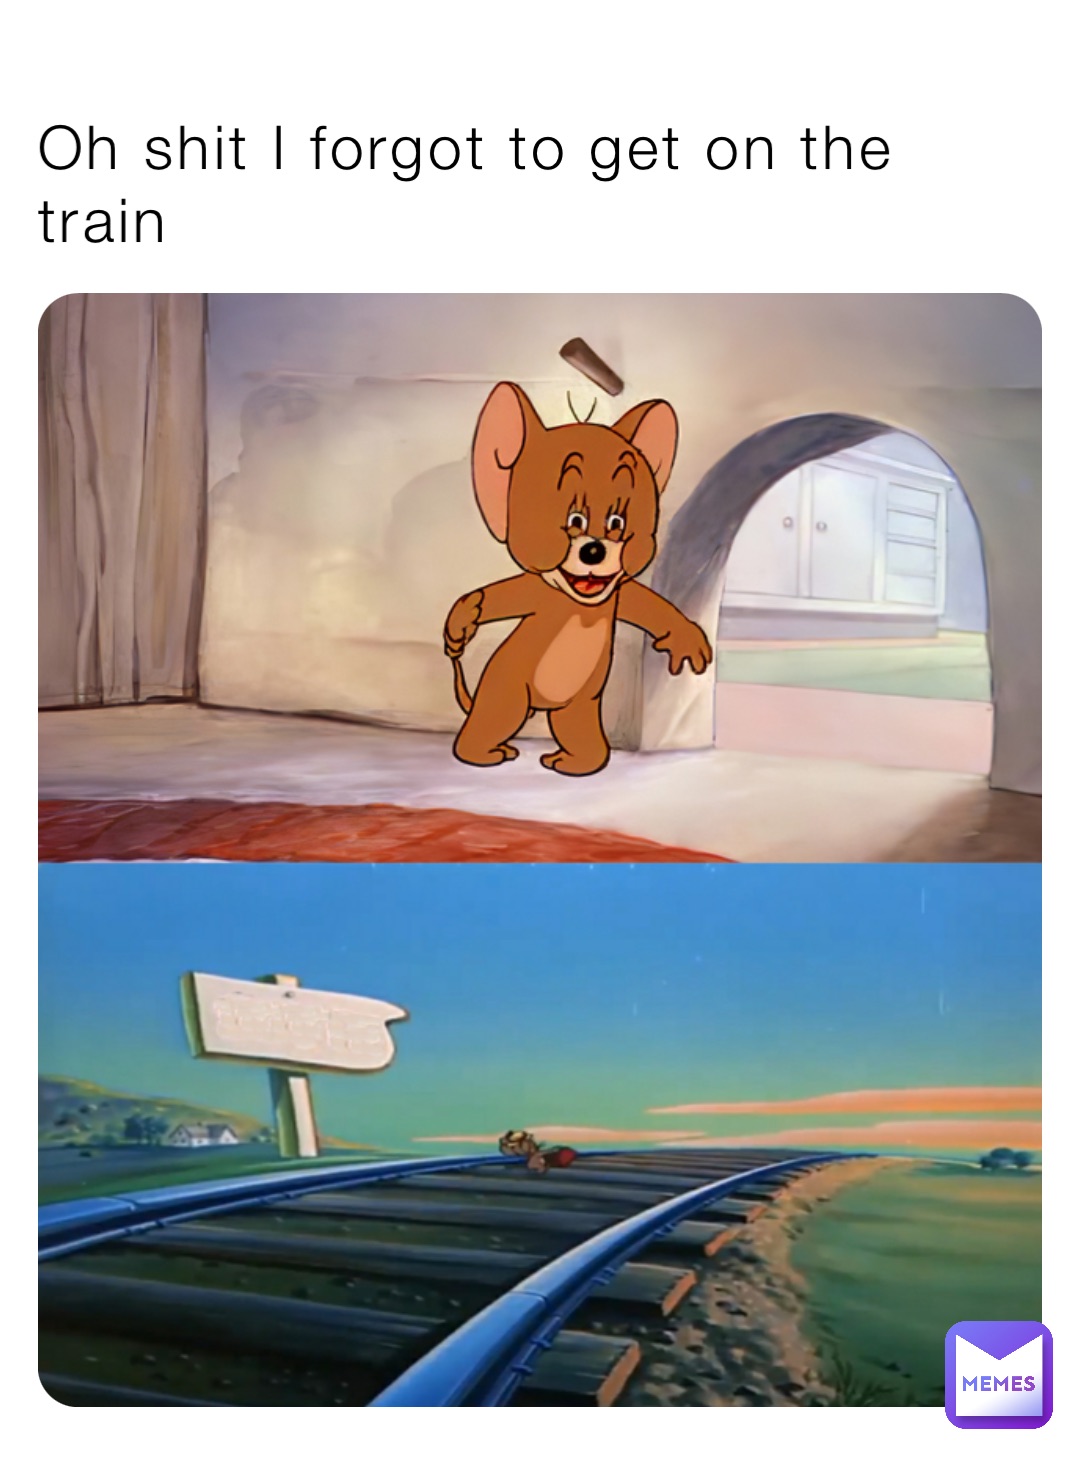 Oh shit I forgot to get on the train